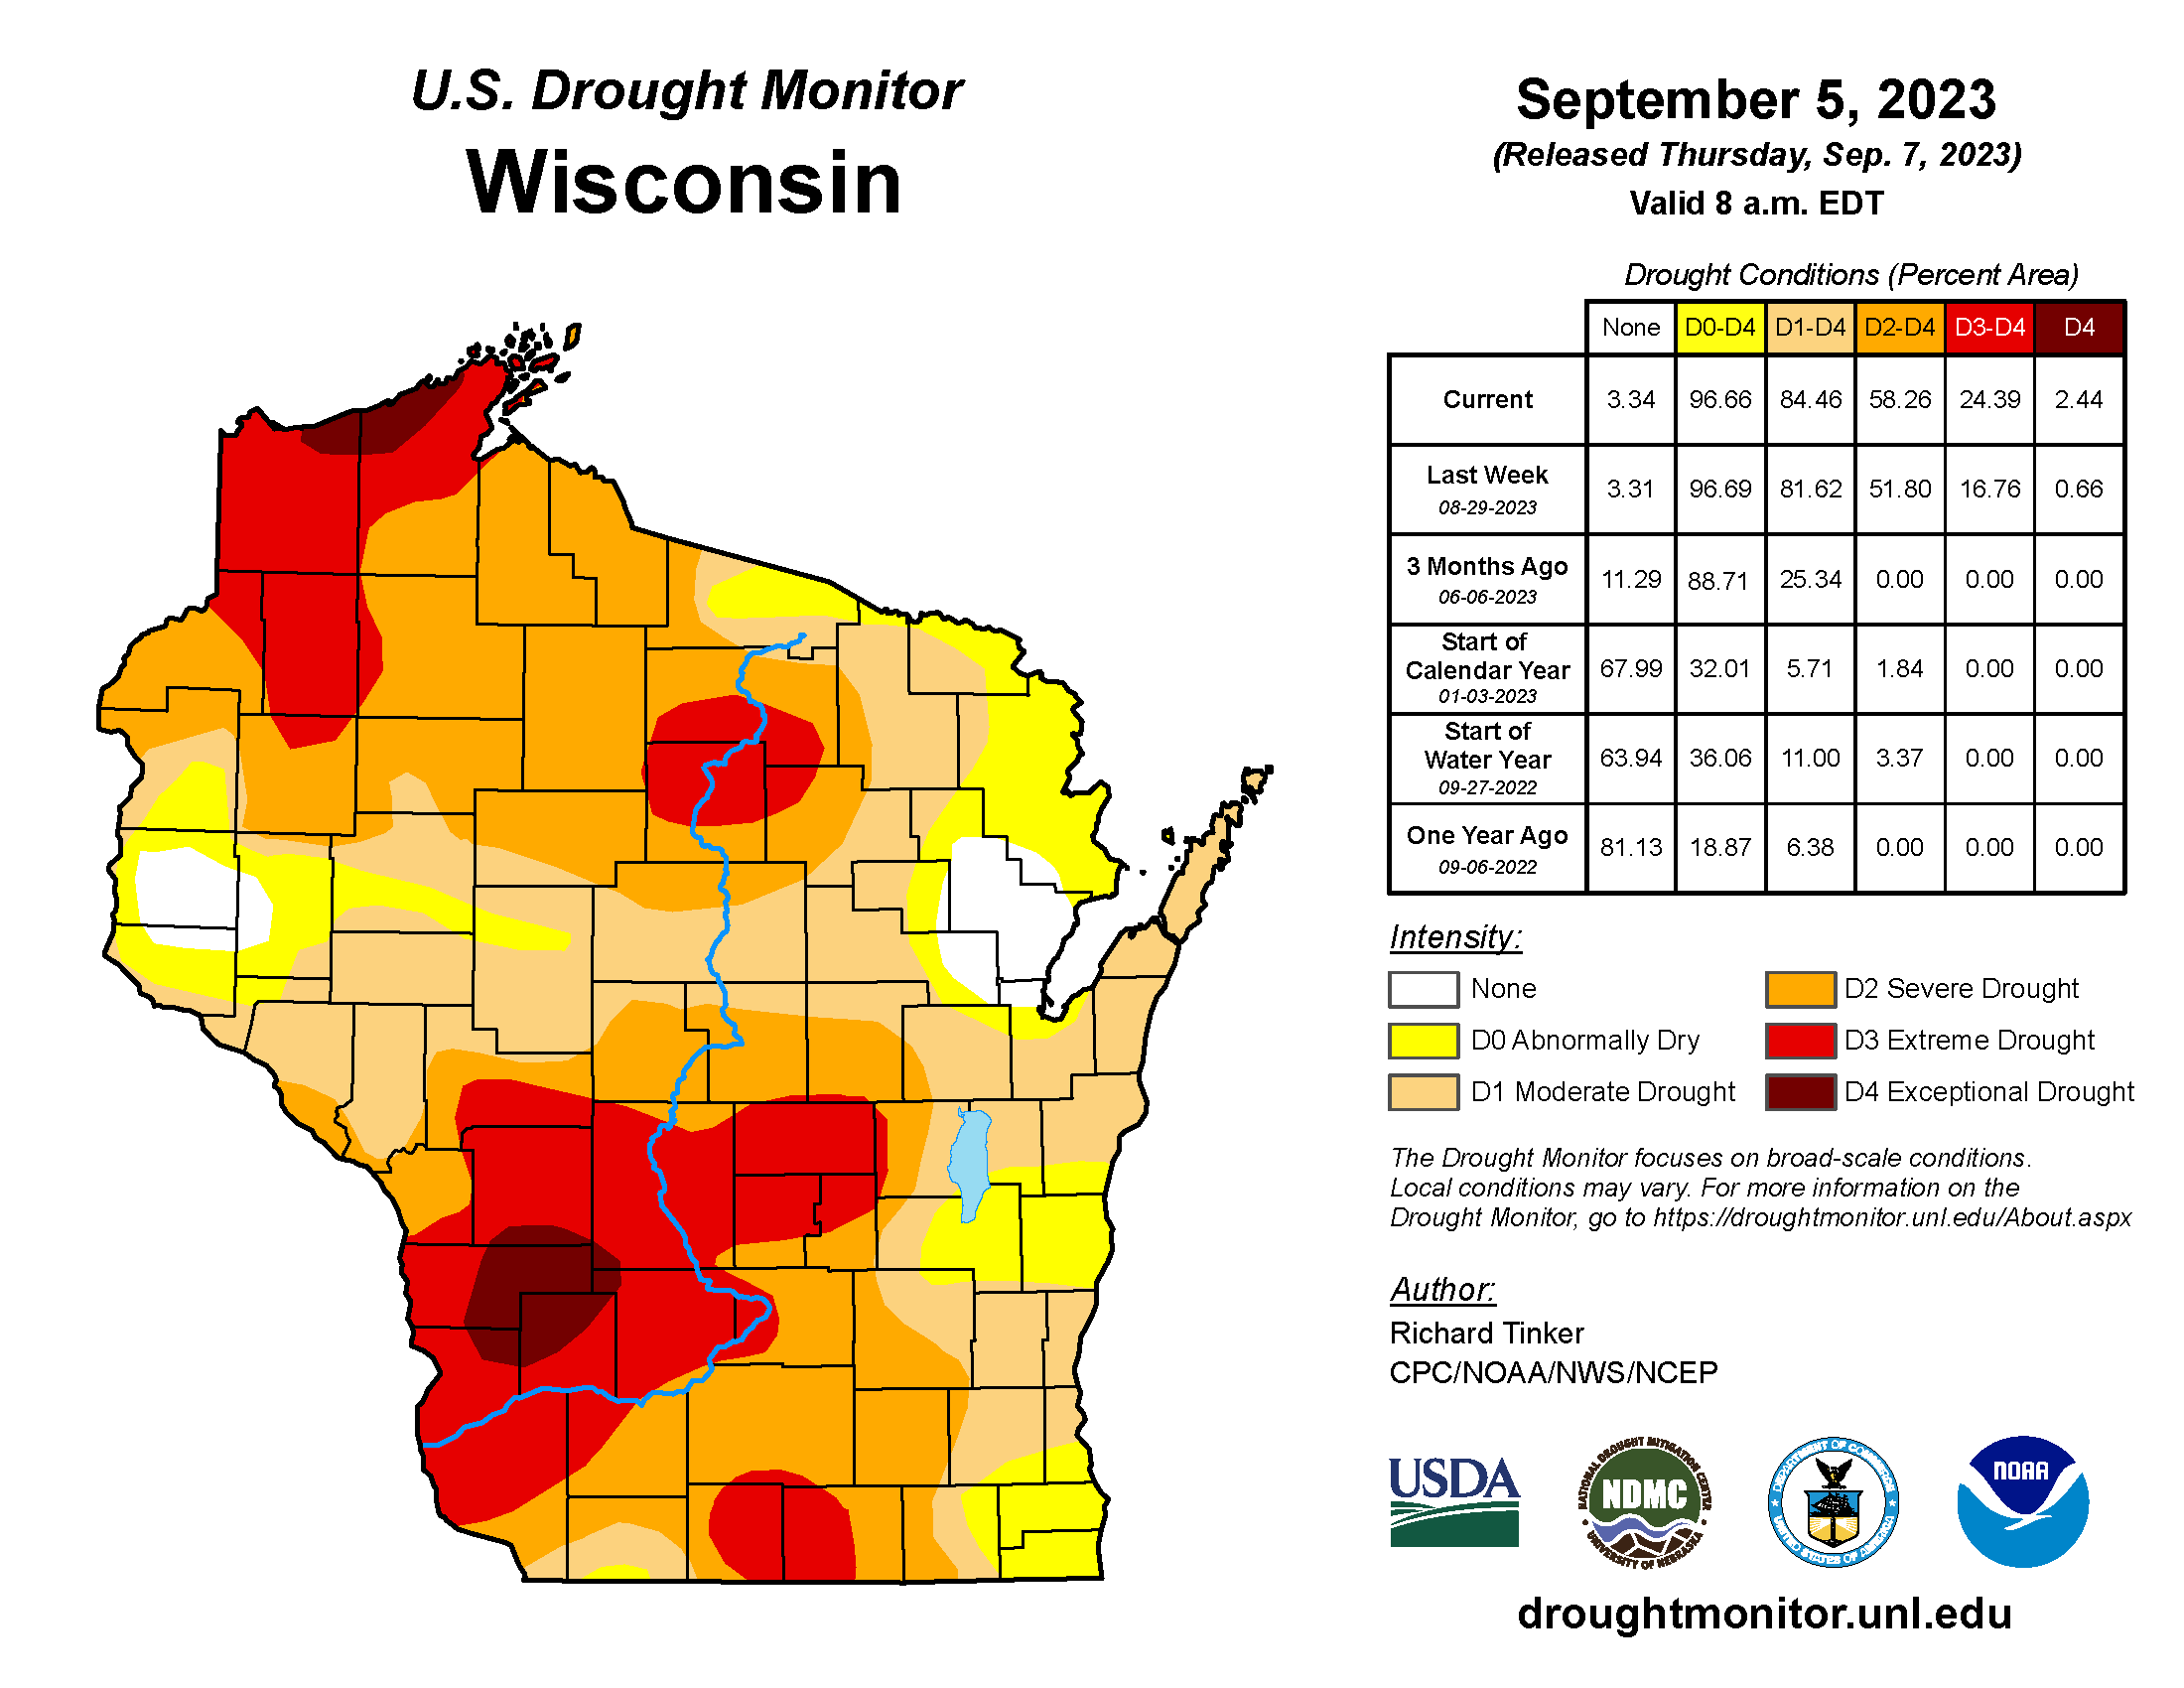 A map of Wisconsin is covered in shades of red, orange and yellow to show degrees of drought